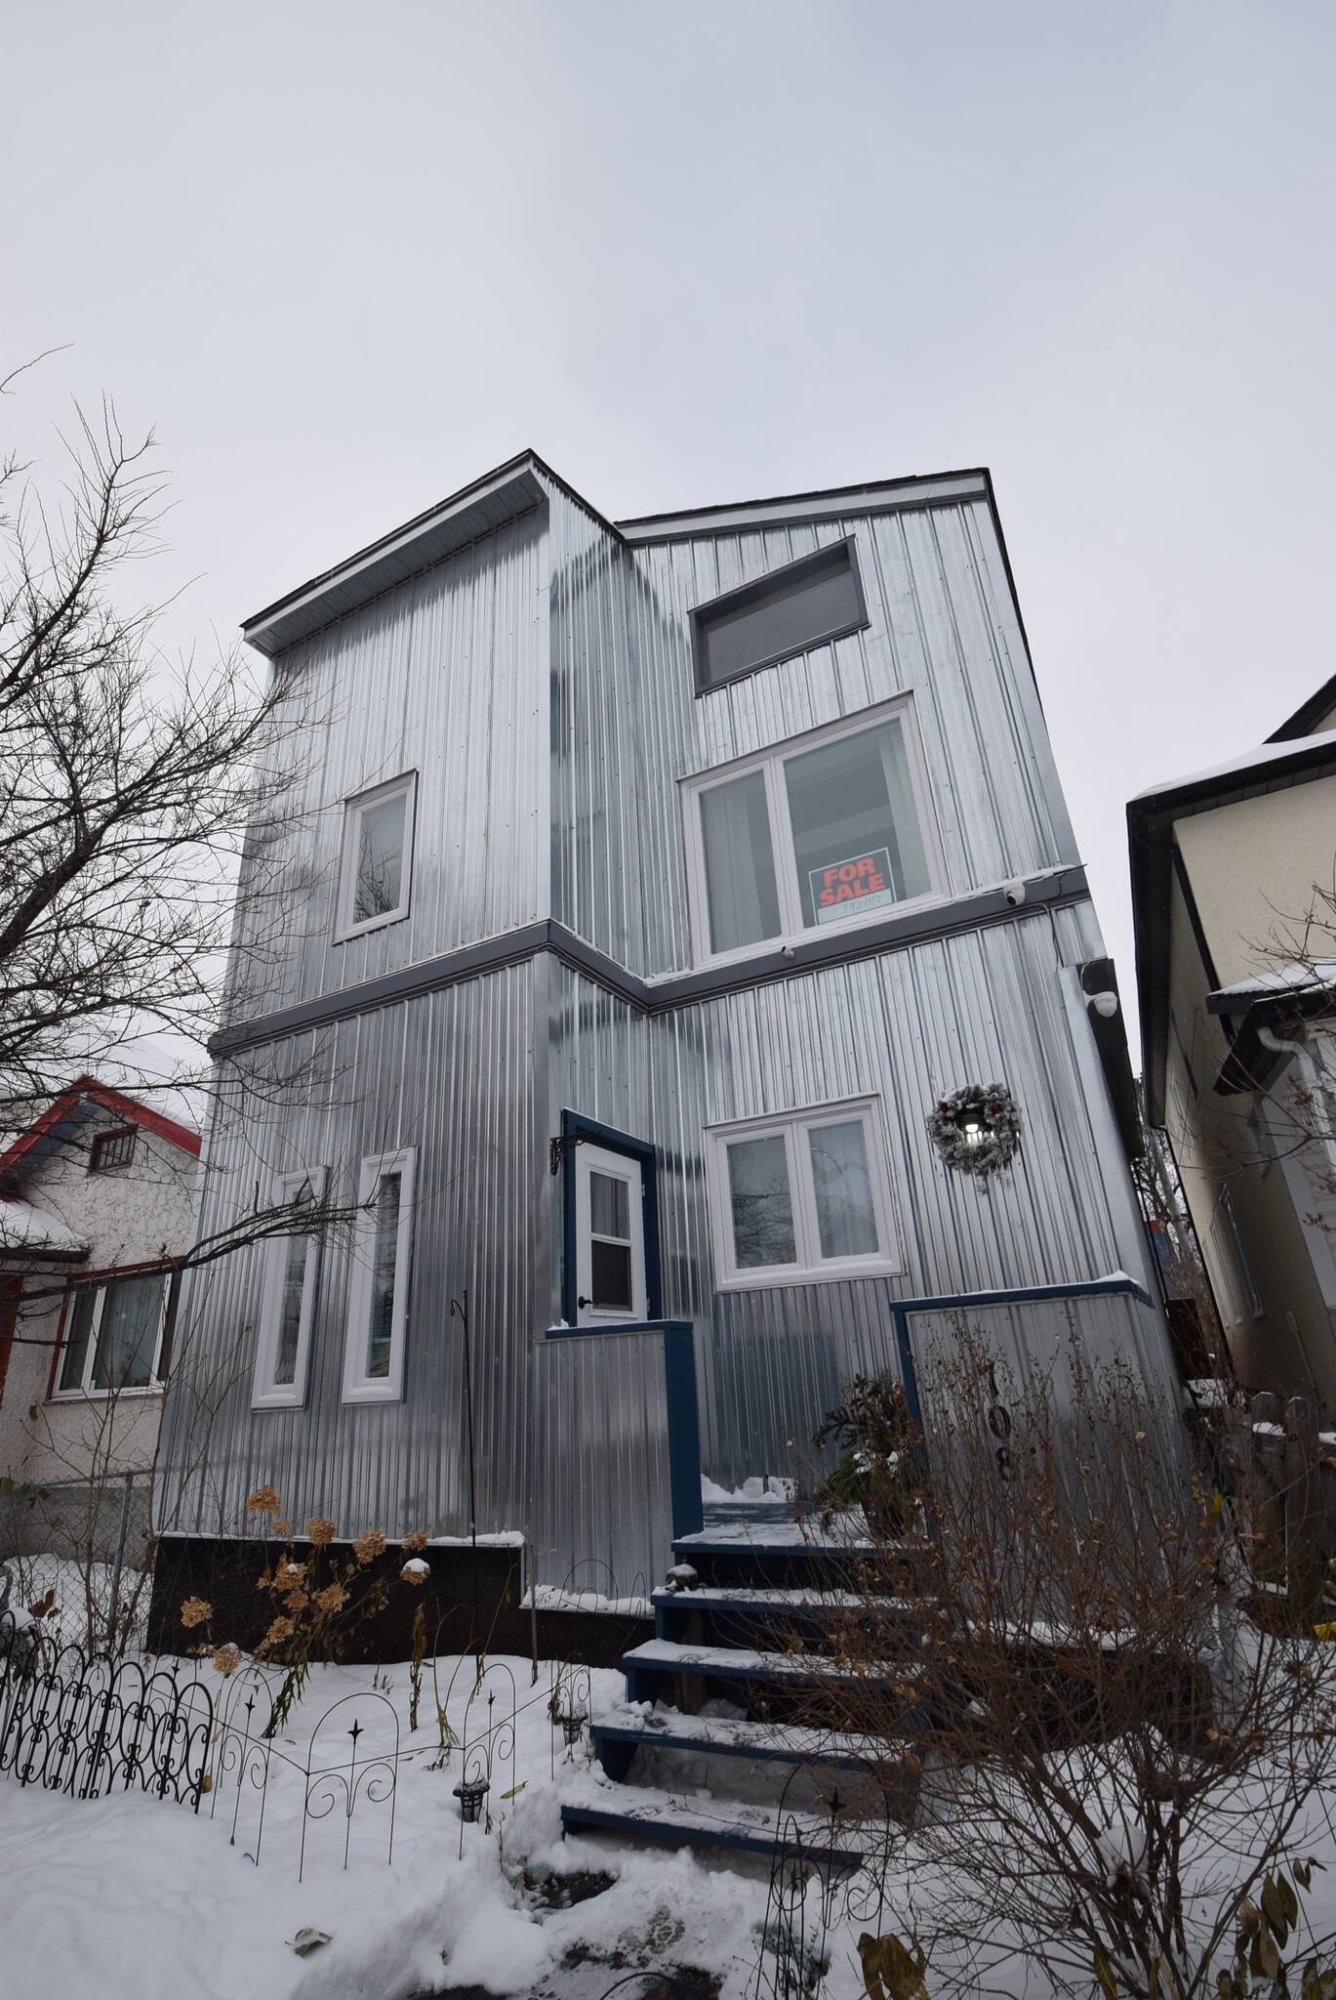  <p>Photos by Todd Lewys / Winnipeg Free Press</p>
                                <p>Built in 1905, this unique home received a vertical addition and was clad in metal in 1984 and has since received many modern updates.</p> 